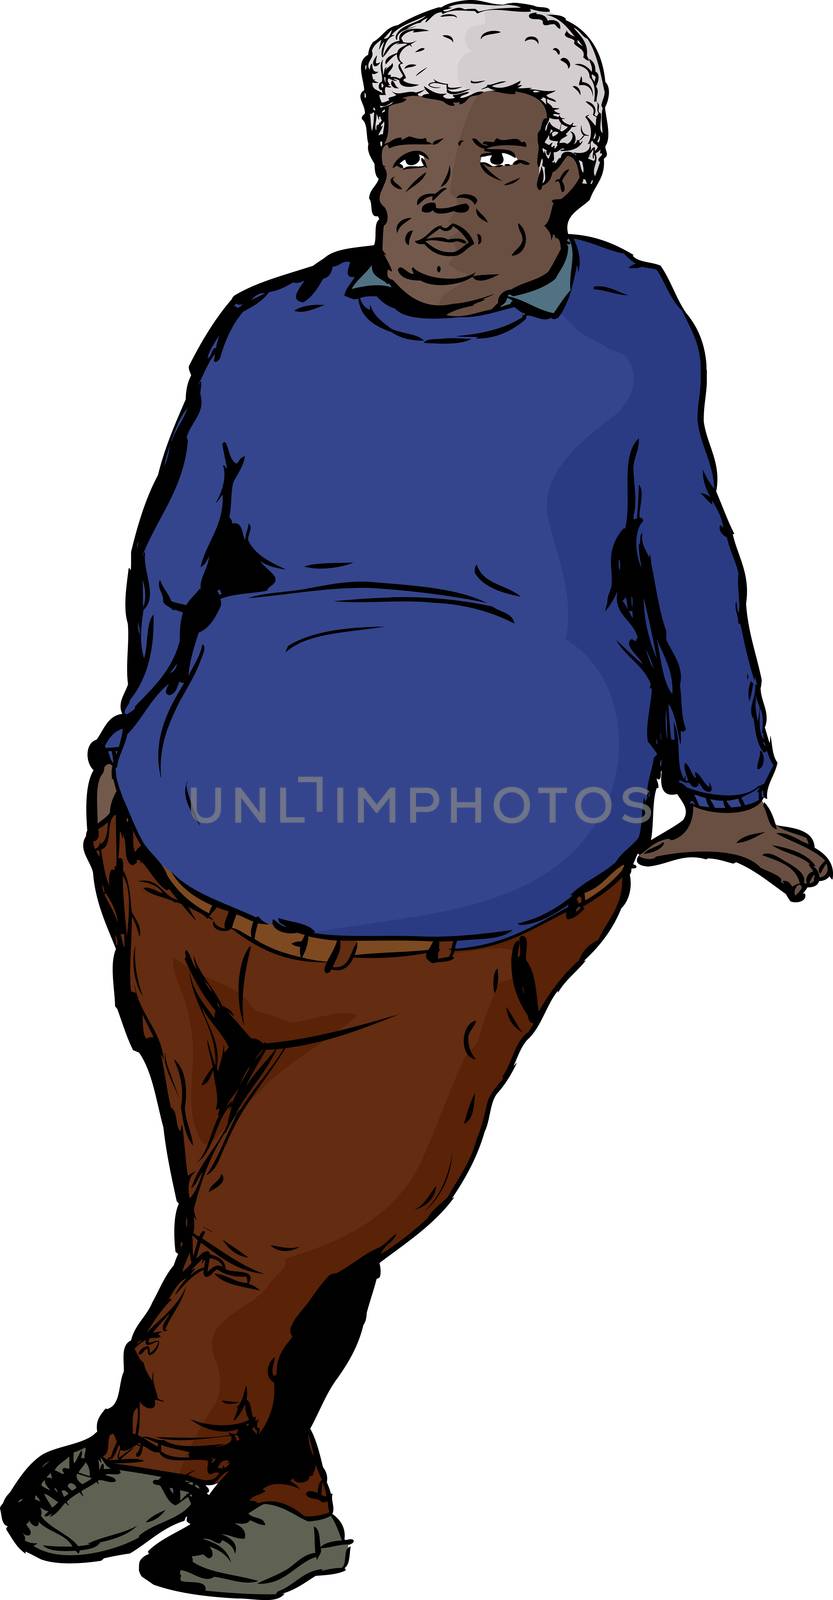 Single older overweight man with big belly leaning over blank area